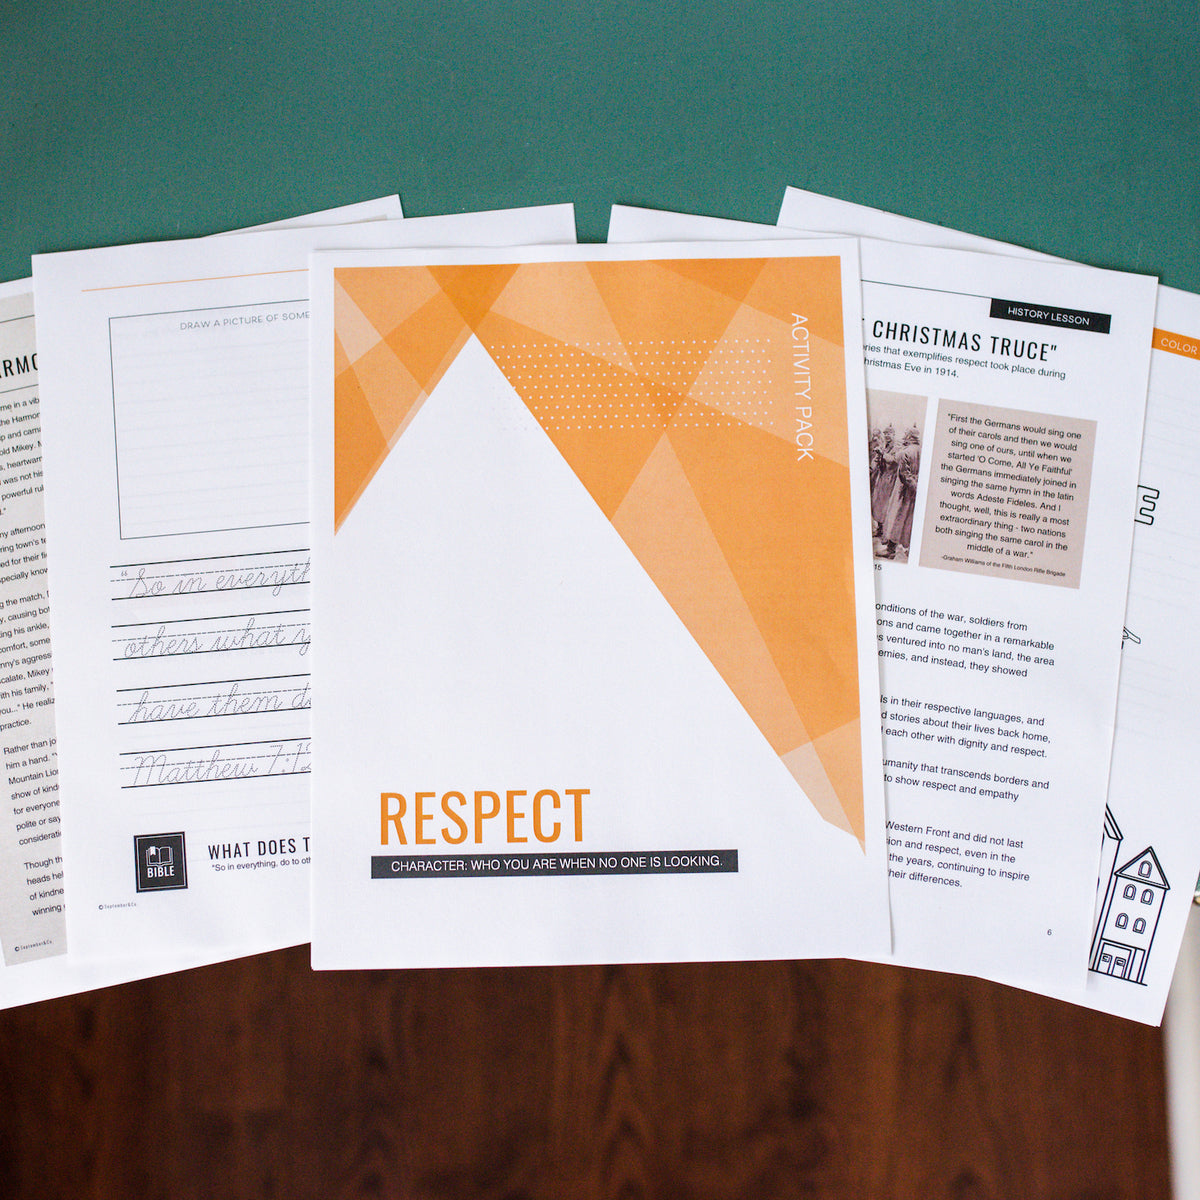 Youth Character Activity Pack - Respect